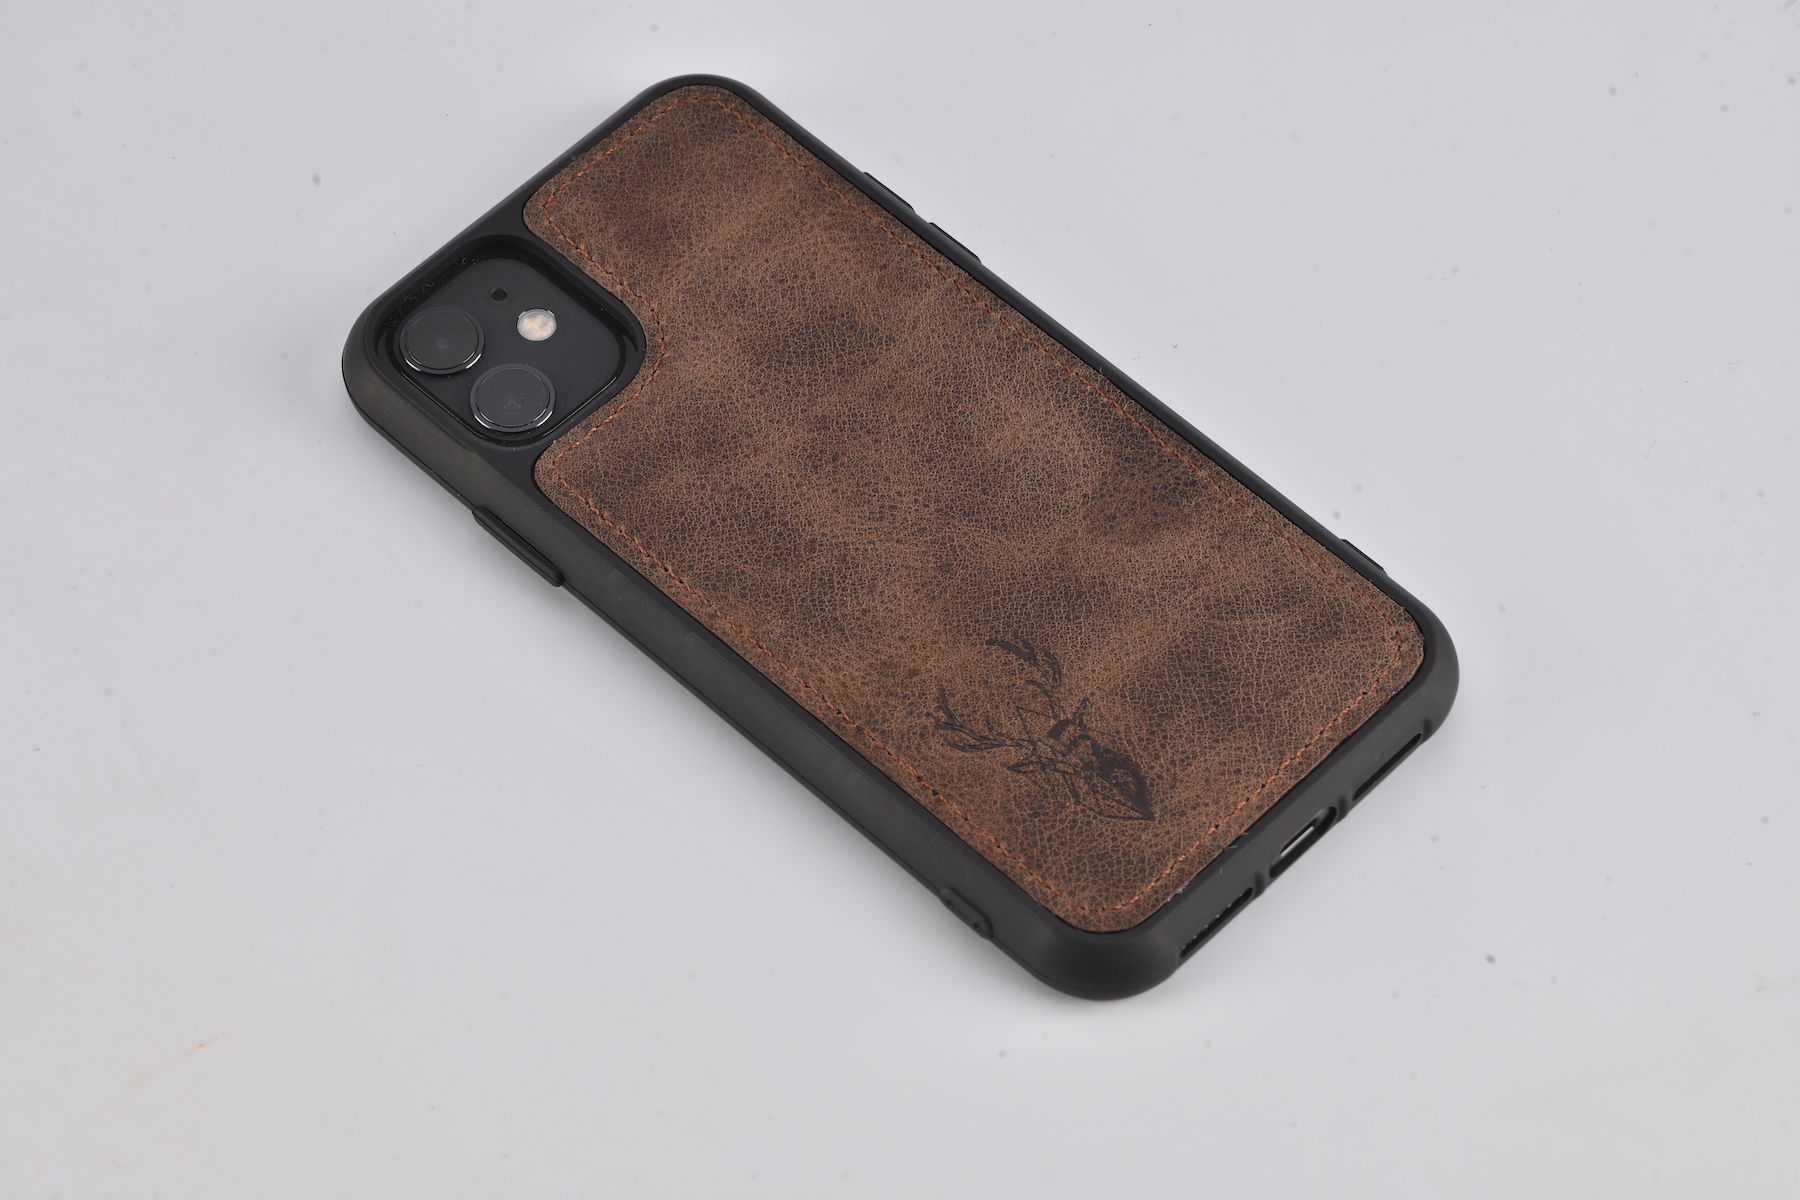 iPhone 12 / 12 Pro Case - Chocolate Brown